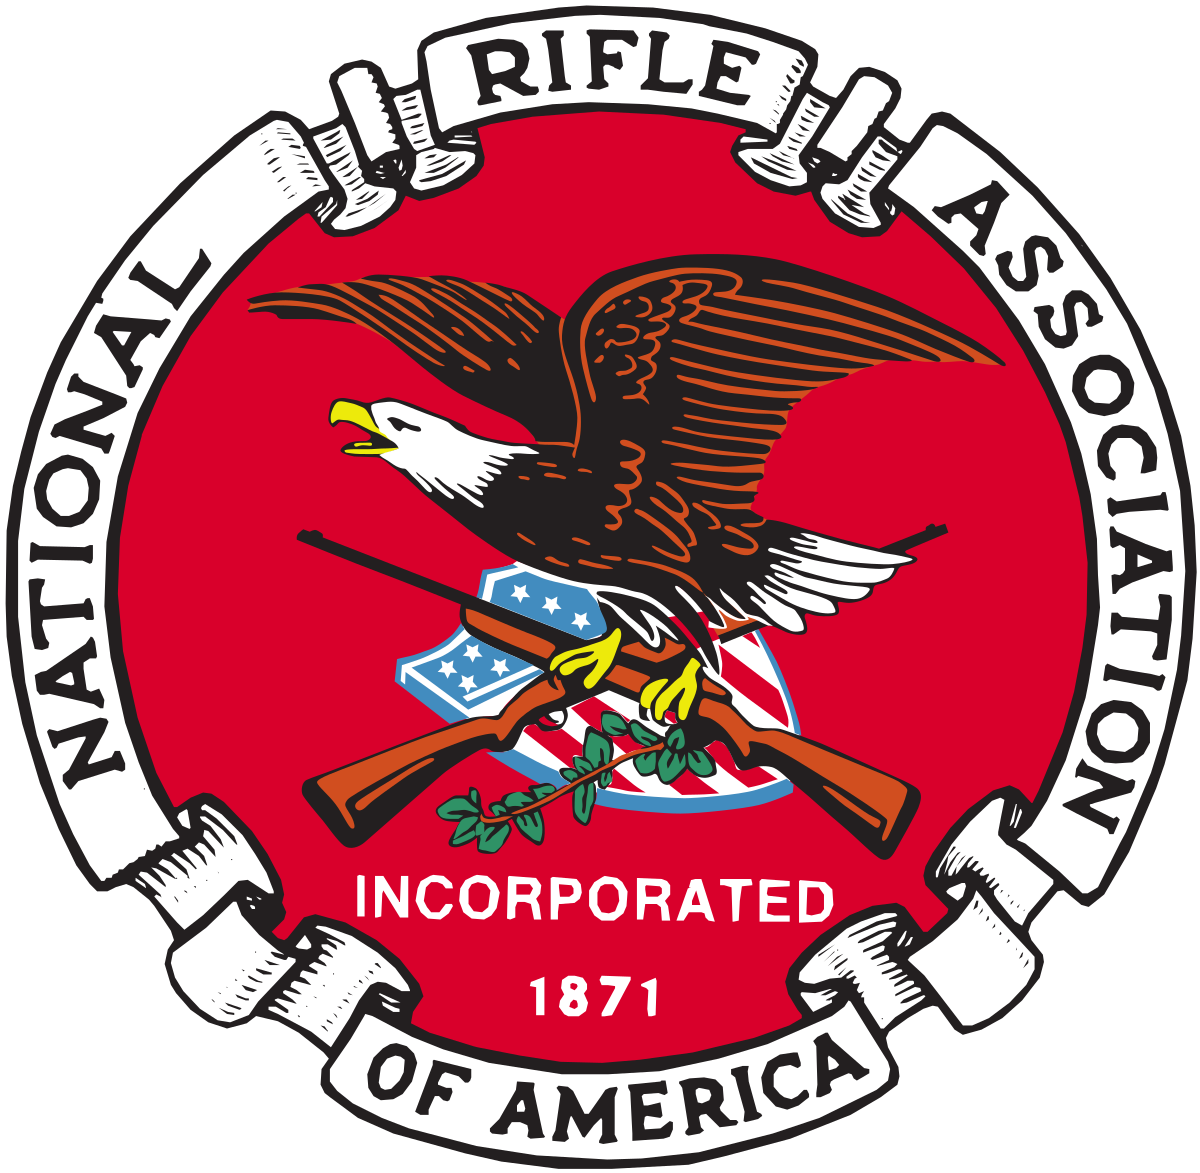 NRA finally crushes gigantic threat to American freedom - by declaring bankruptcy